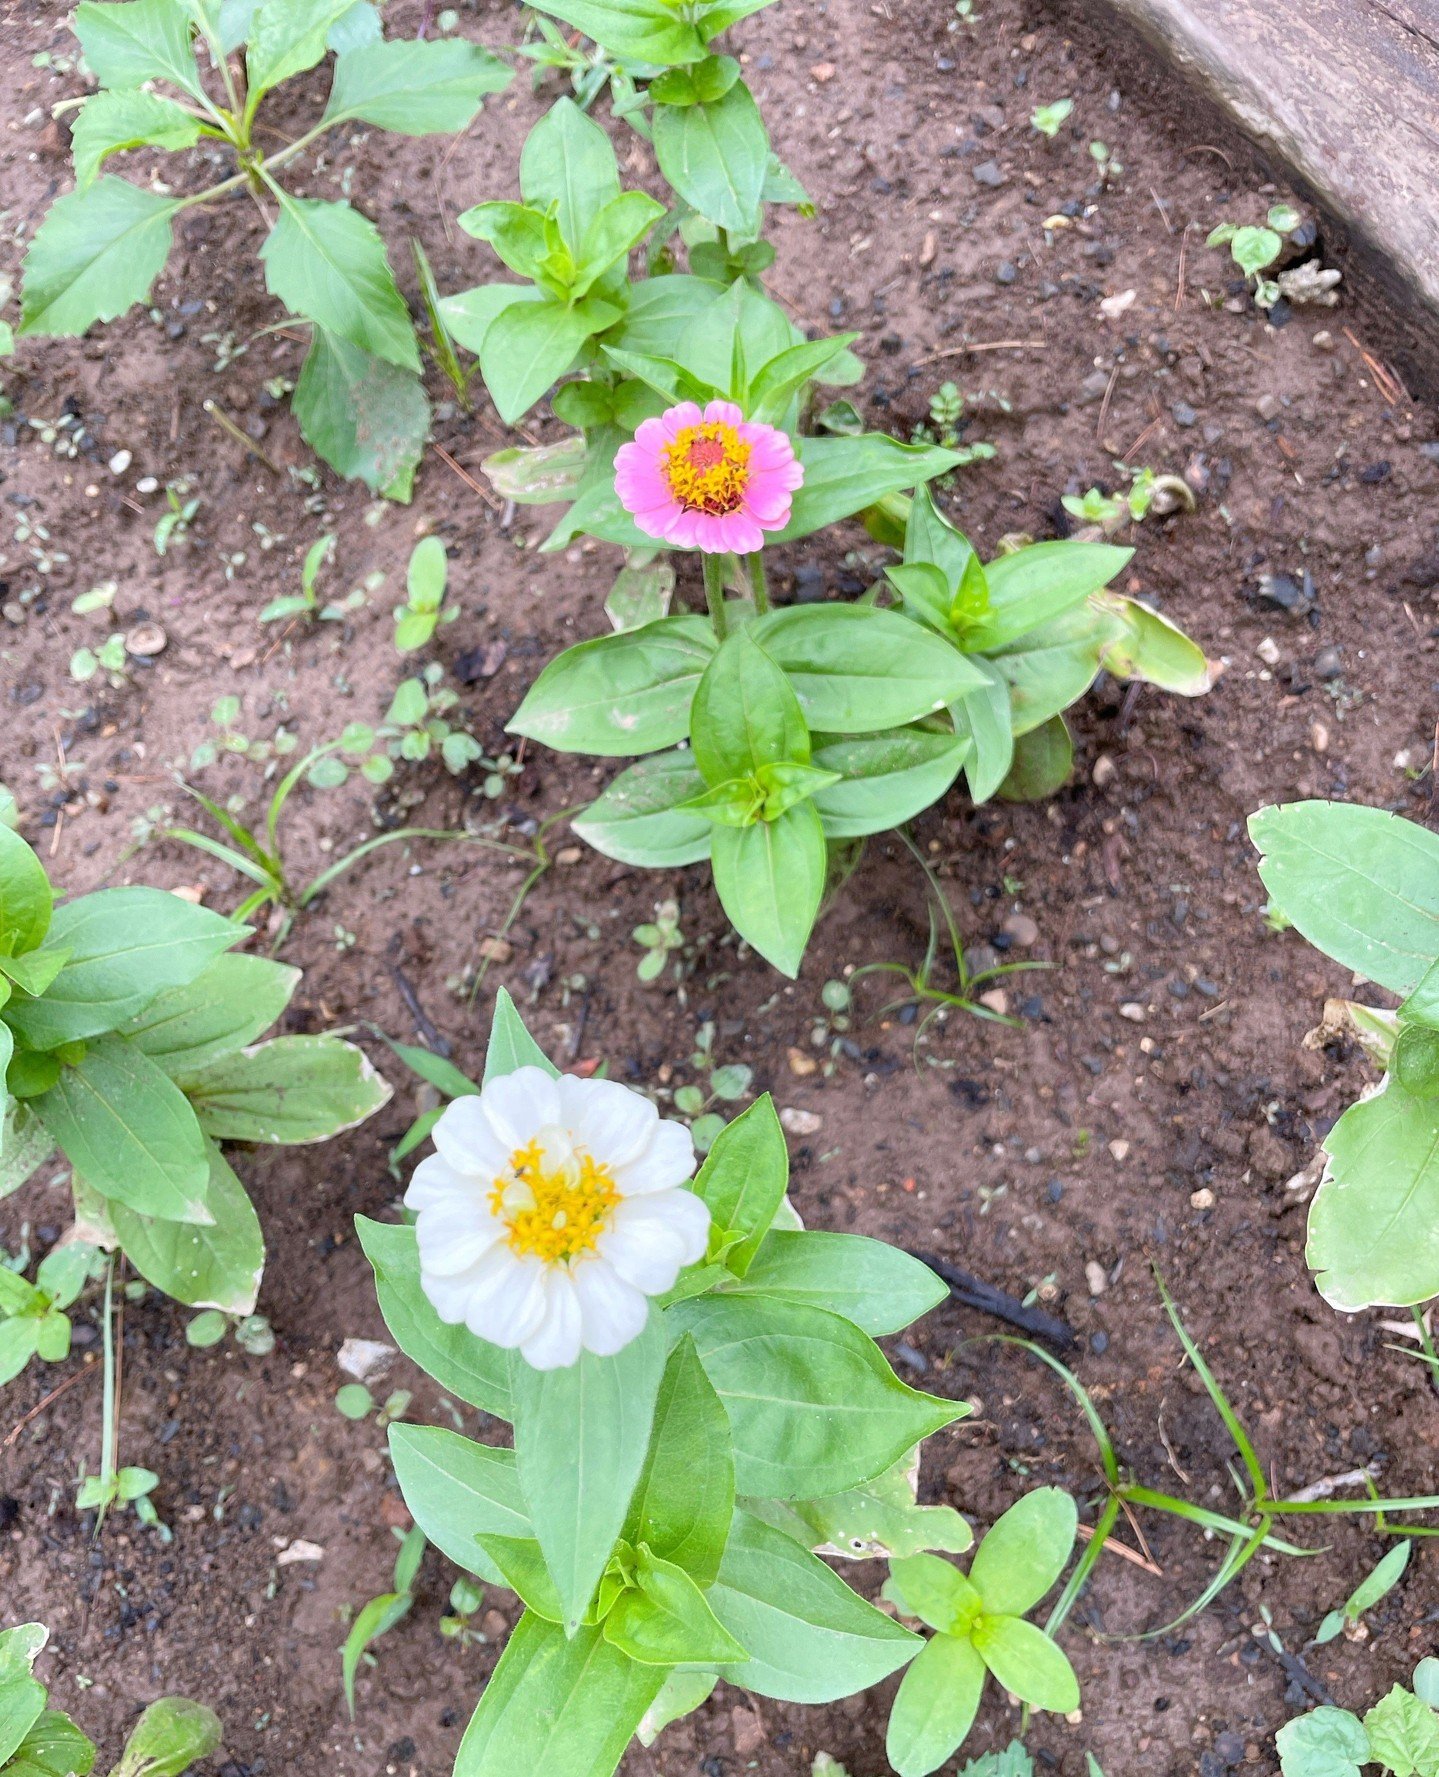 This picture marks the first flowers of the season in our little family garden. Gardening to me is a hobby where I don&rsquo;t pressure myself. I throw things out there, learn as I go, and try to hold on loosely to the hope that seeds will sprout. Su